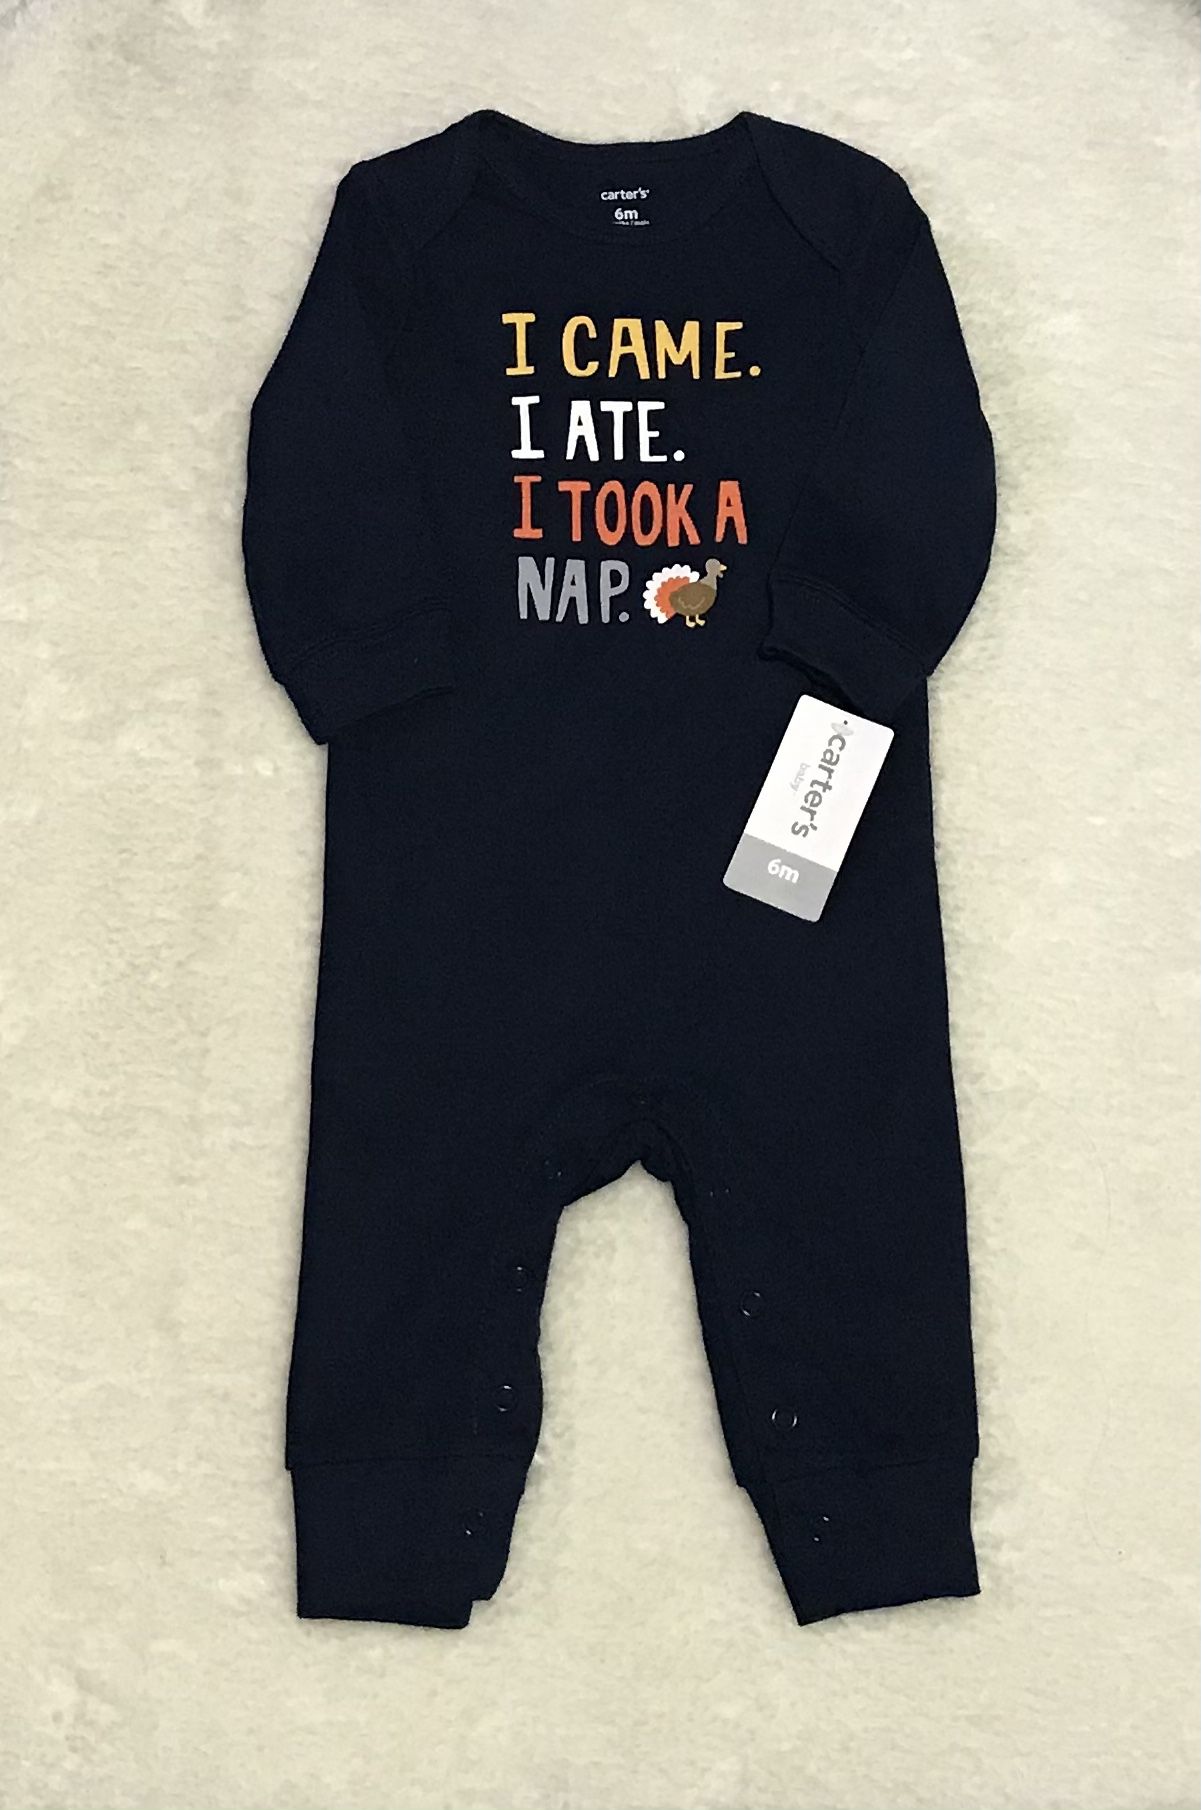 NEW asking $10 SZ 6 Months Thanksgiving Baby Clothes Brand Carter’s